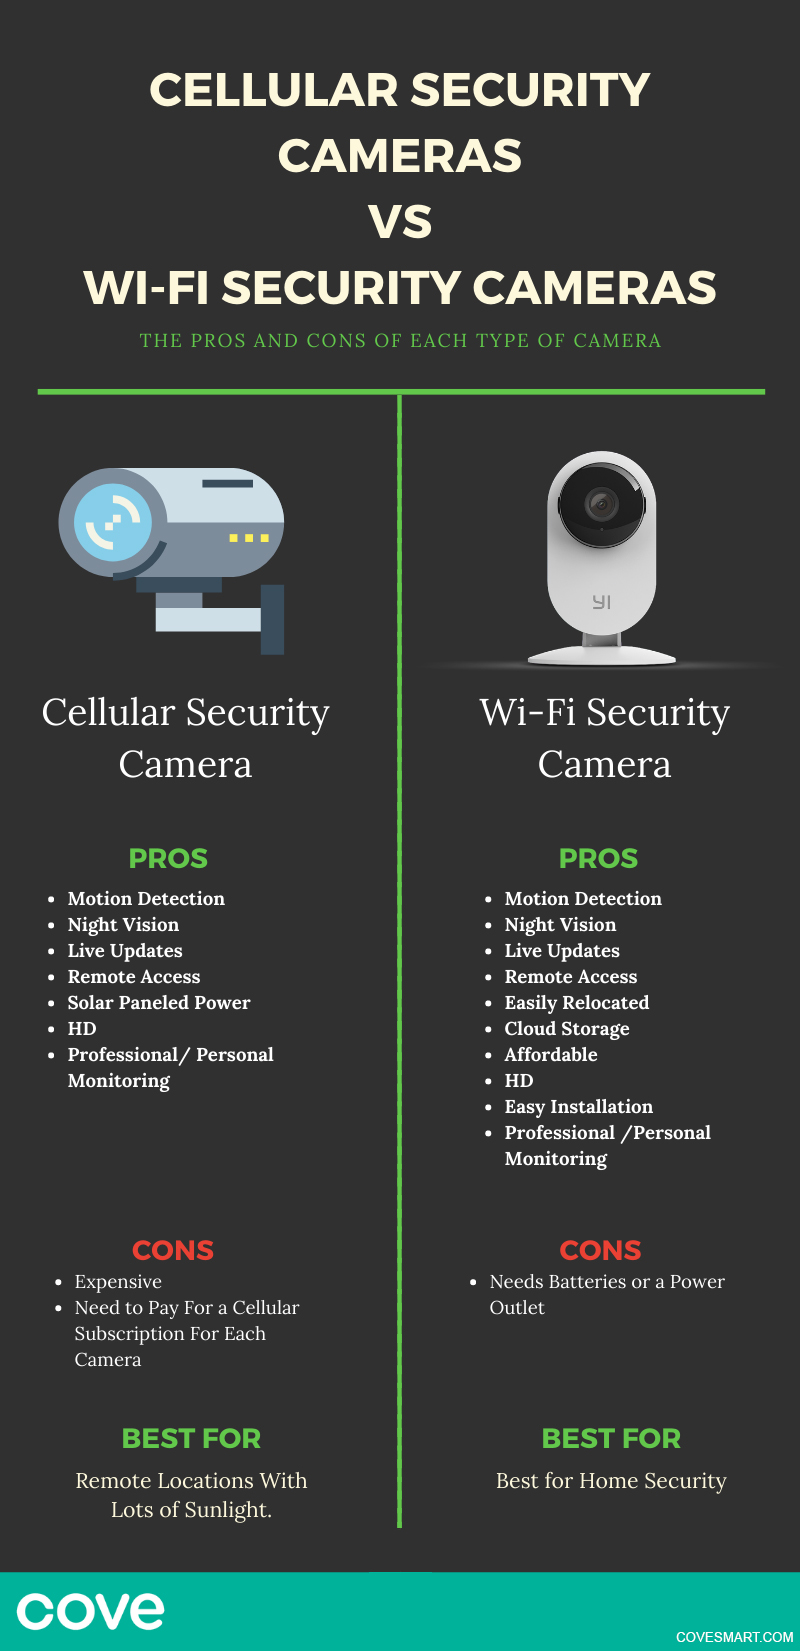 Pros and Cons of Cellular Security Cameras